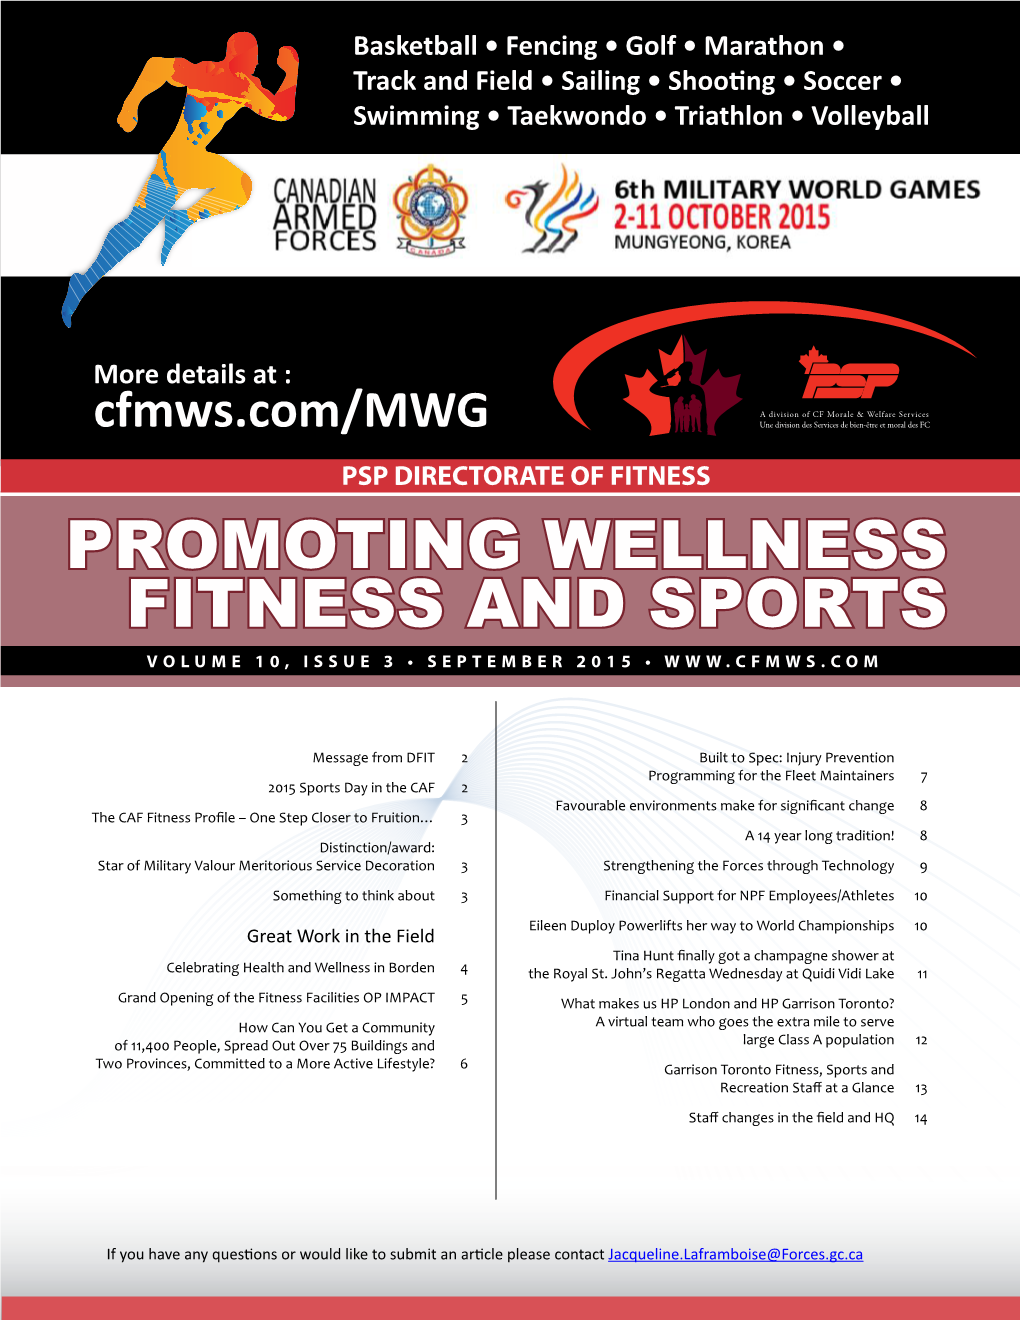 Promoting Wellness Fitness and Sports Volume 10, Issue 3 • September 2015 •